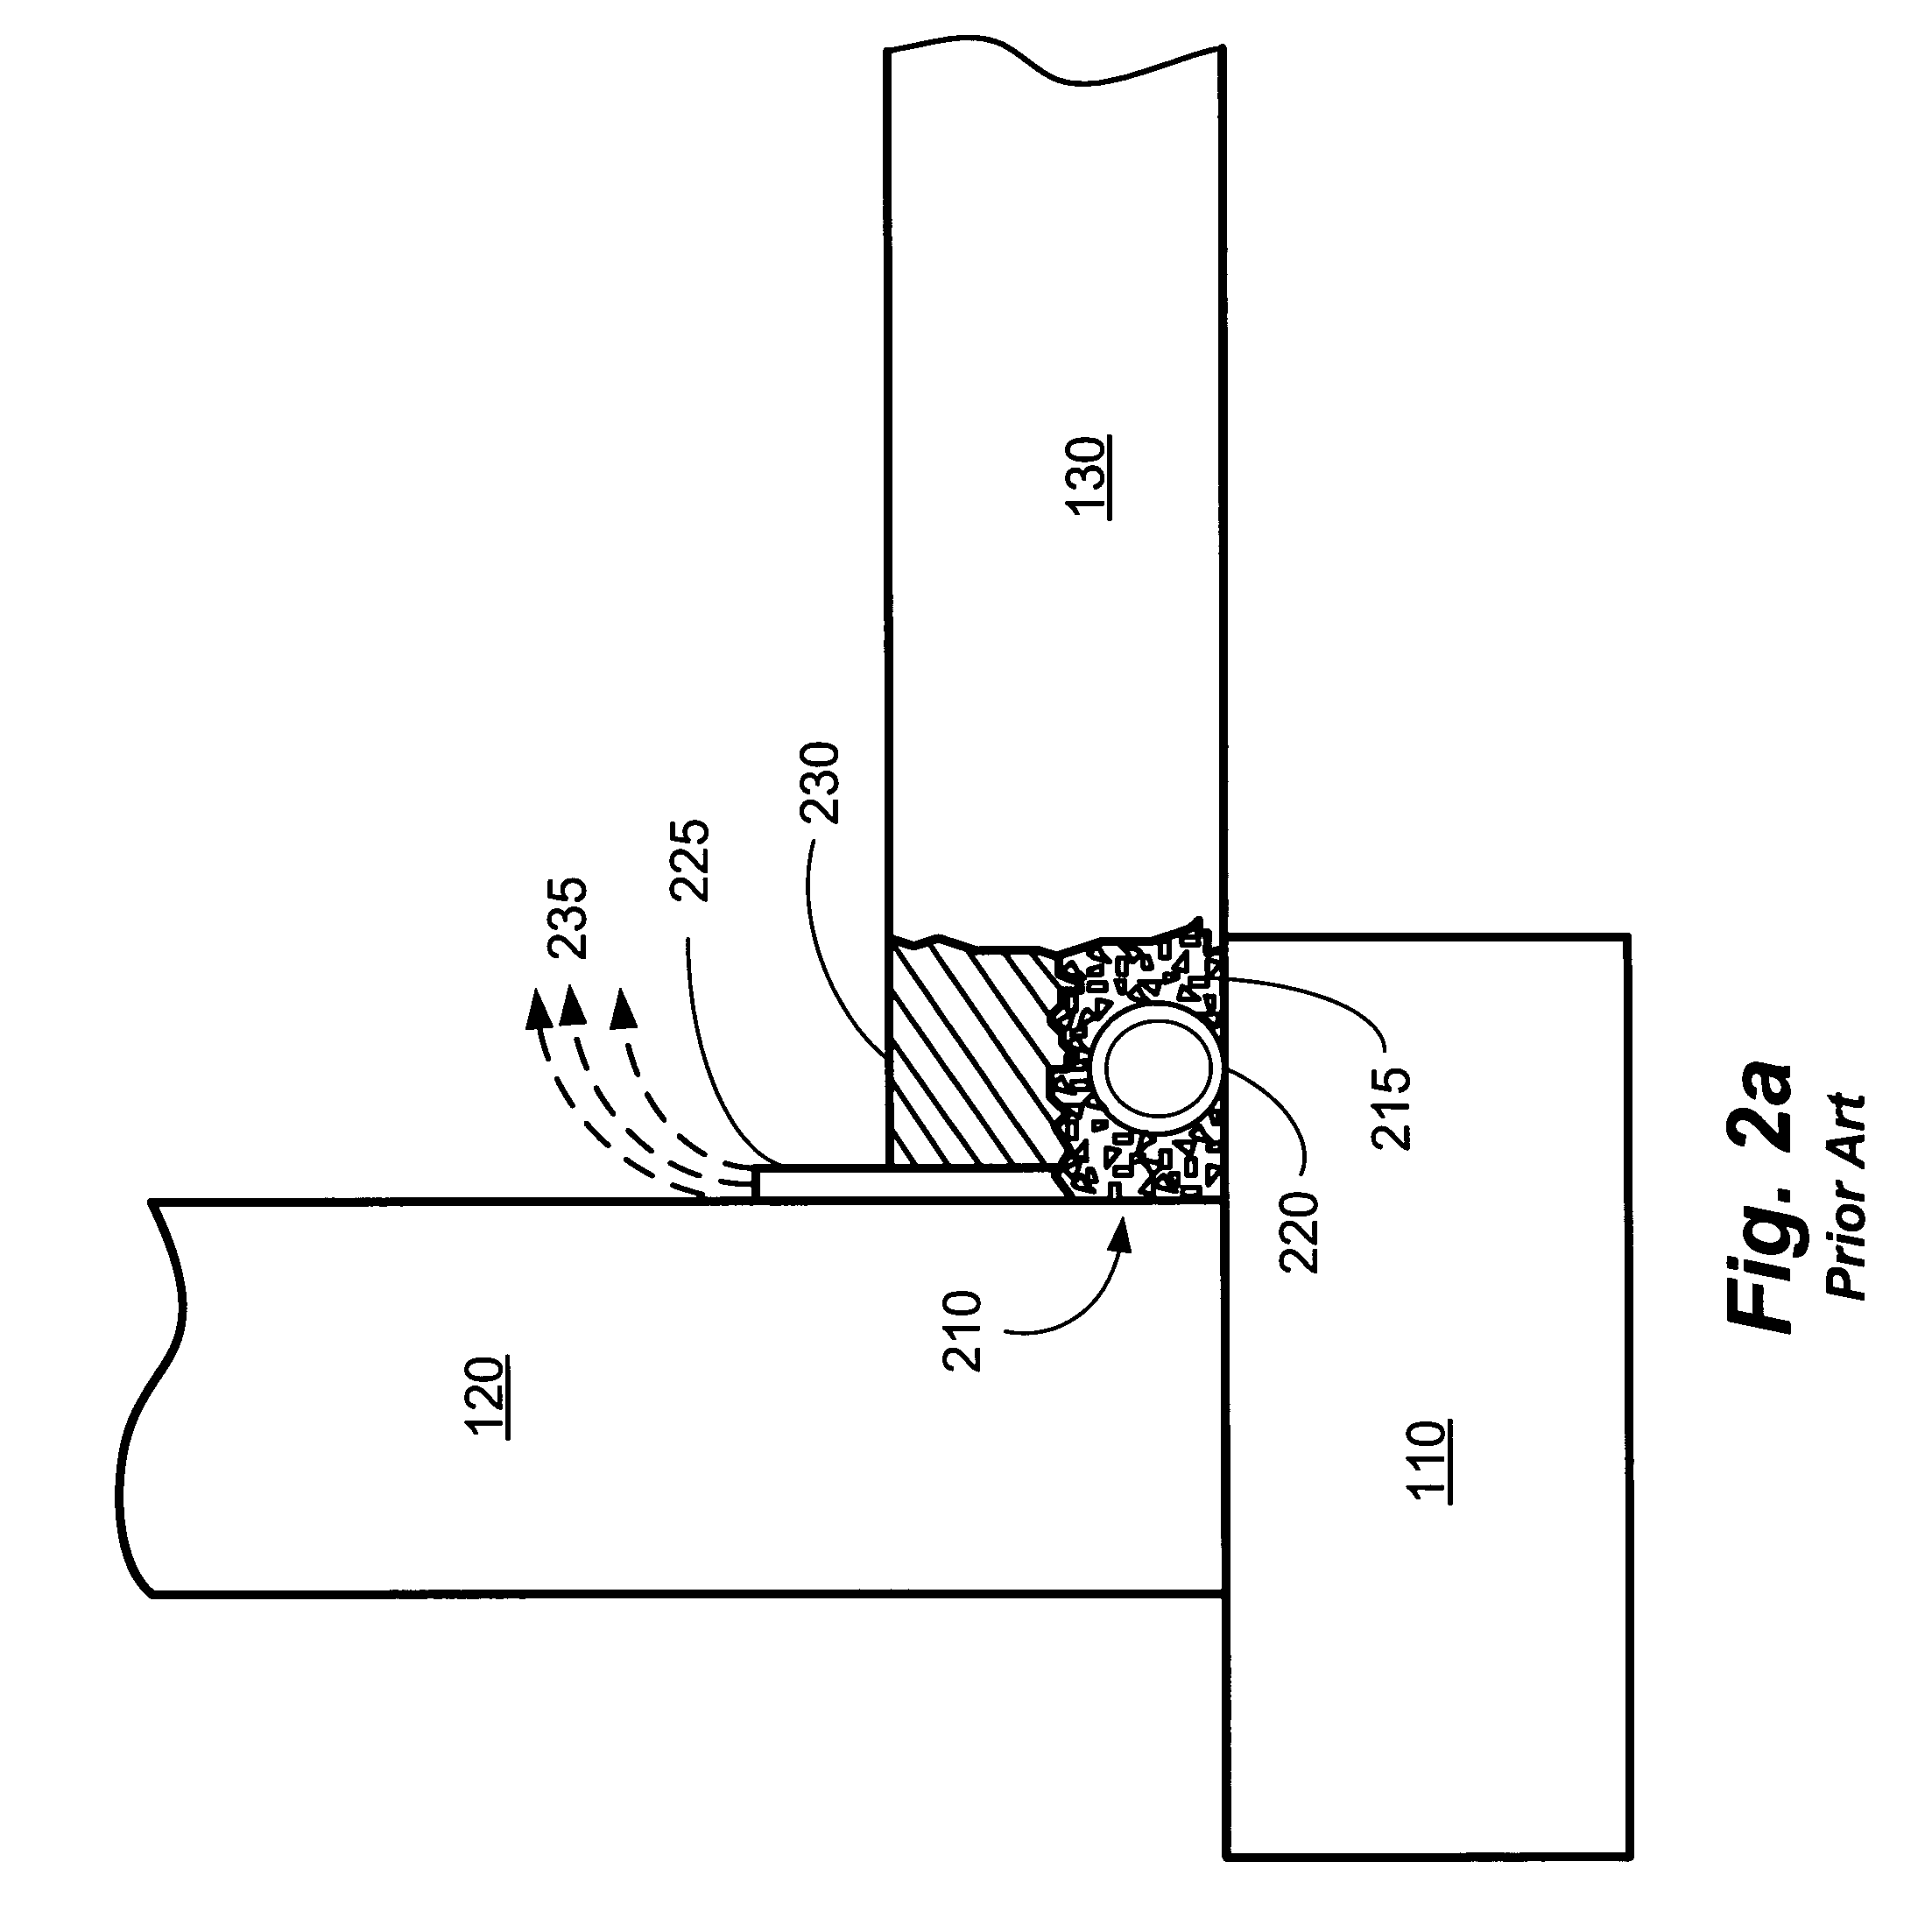 System and methods for providing a waterproofing form for structural waterproofing